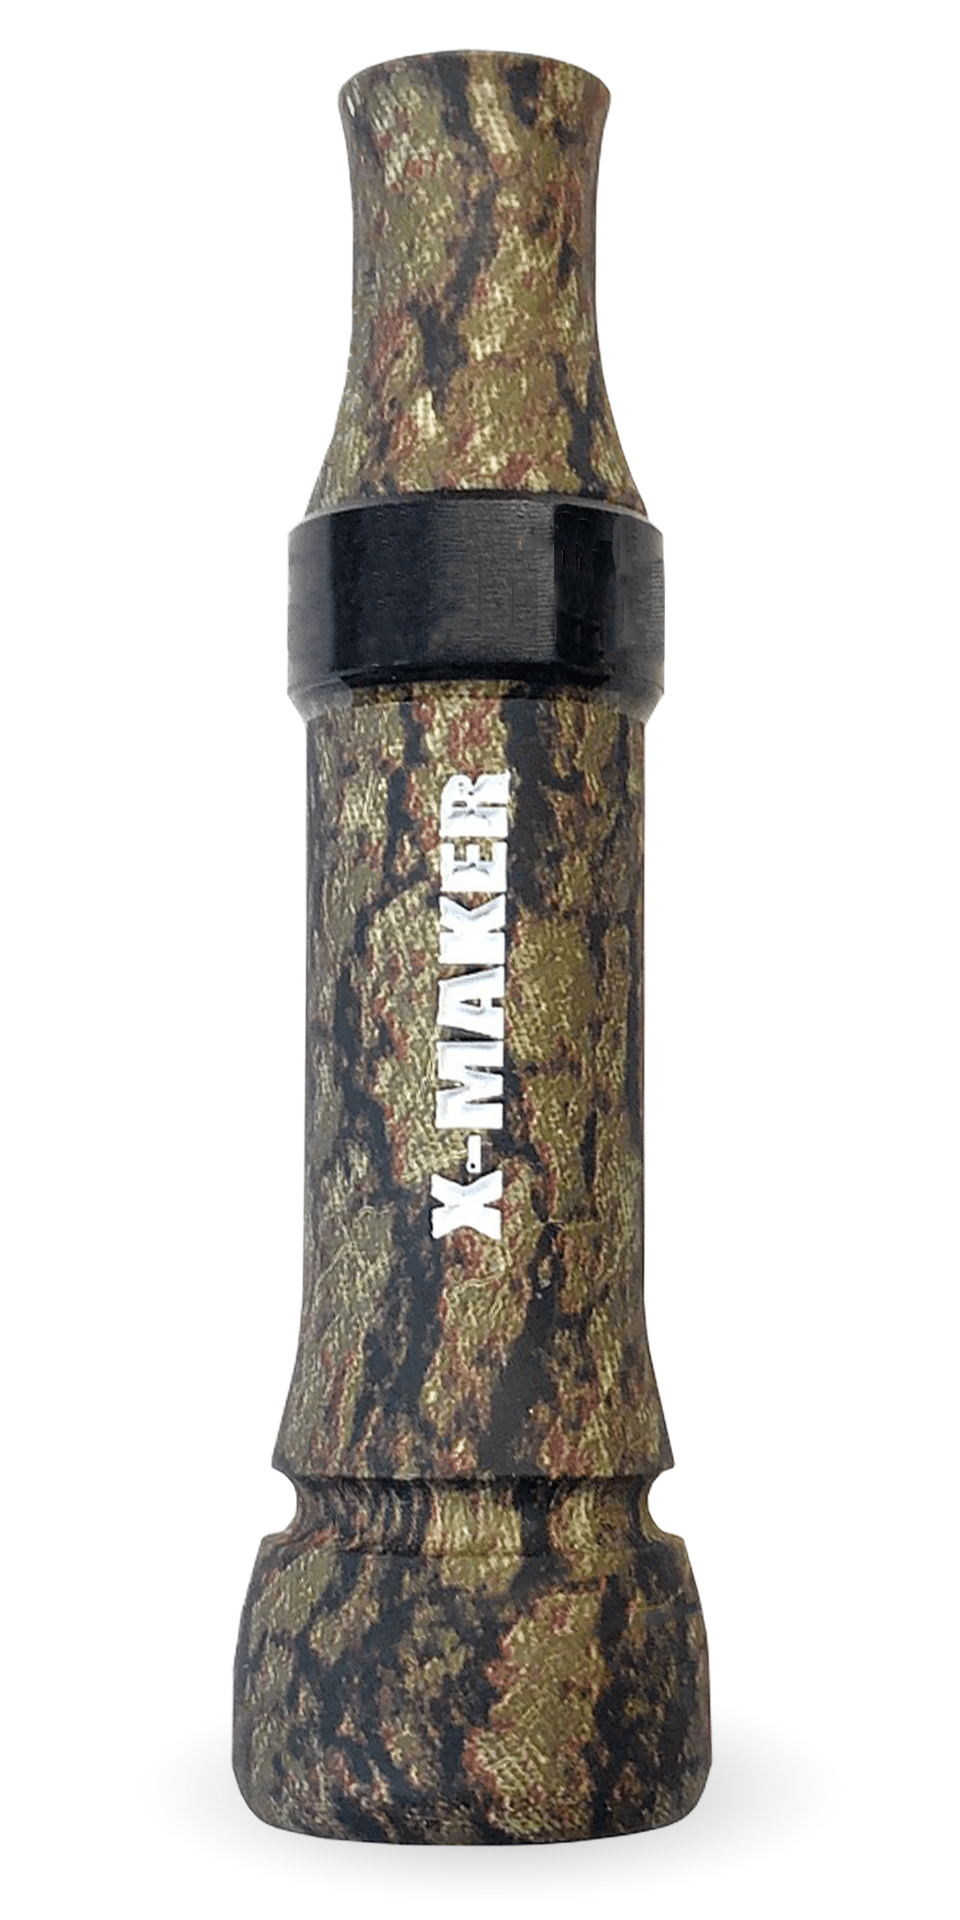 X-Maker Ultimate Camo Duck Call with Plain Black Band Duck Call by Kirk McCullough